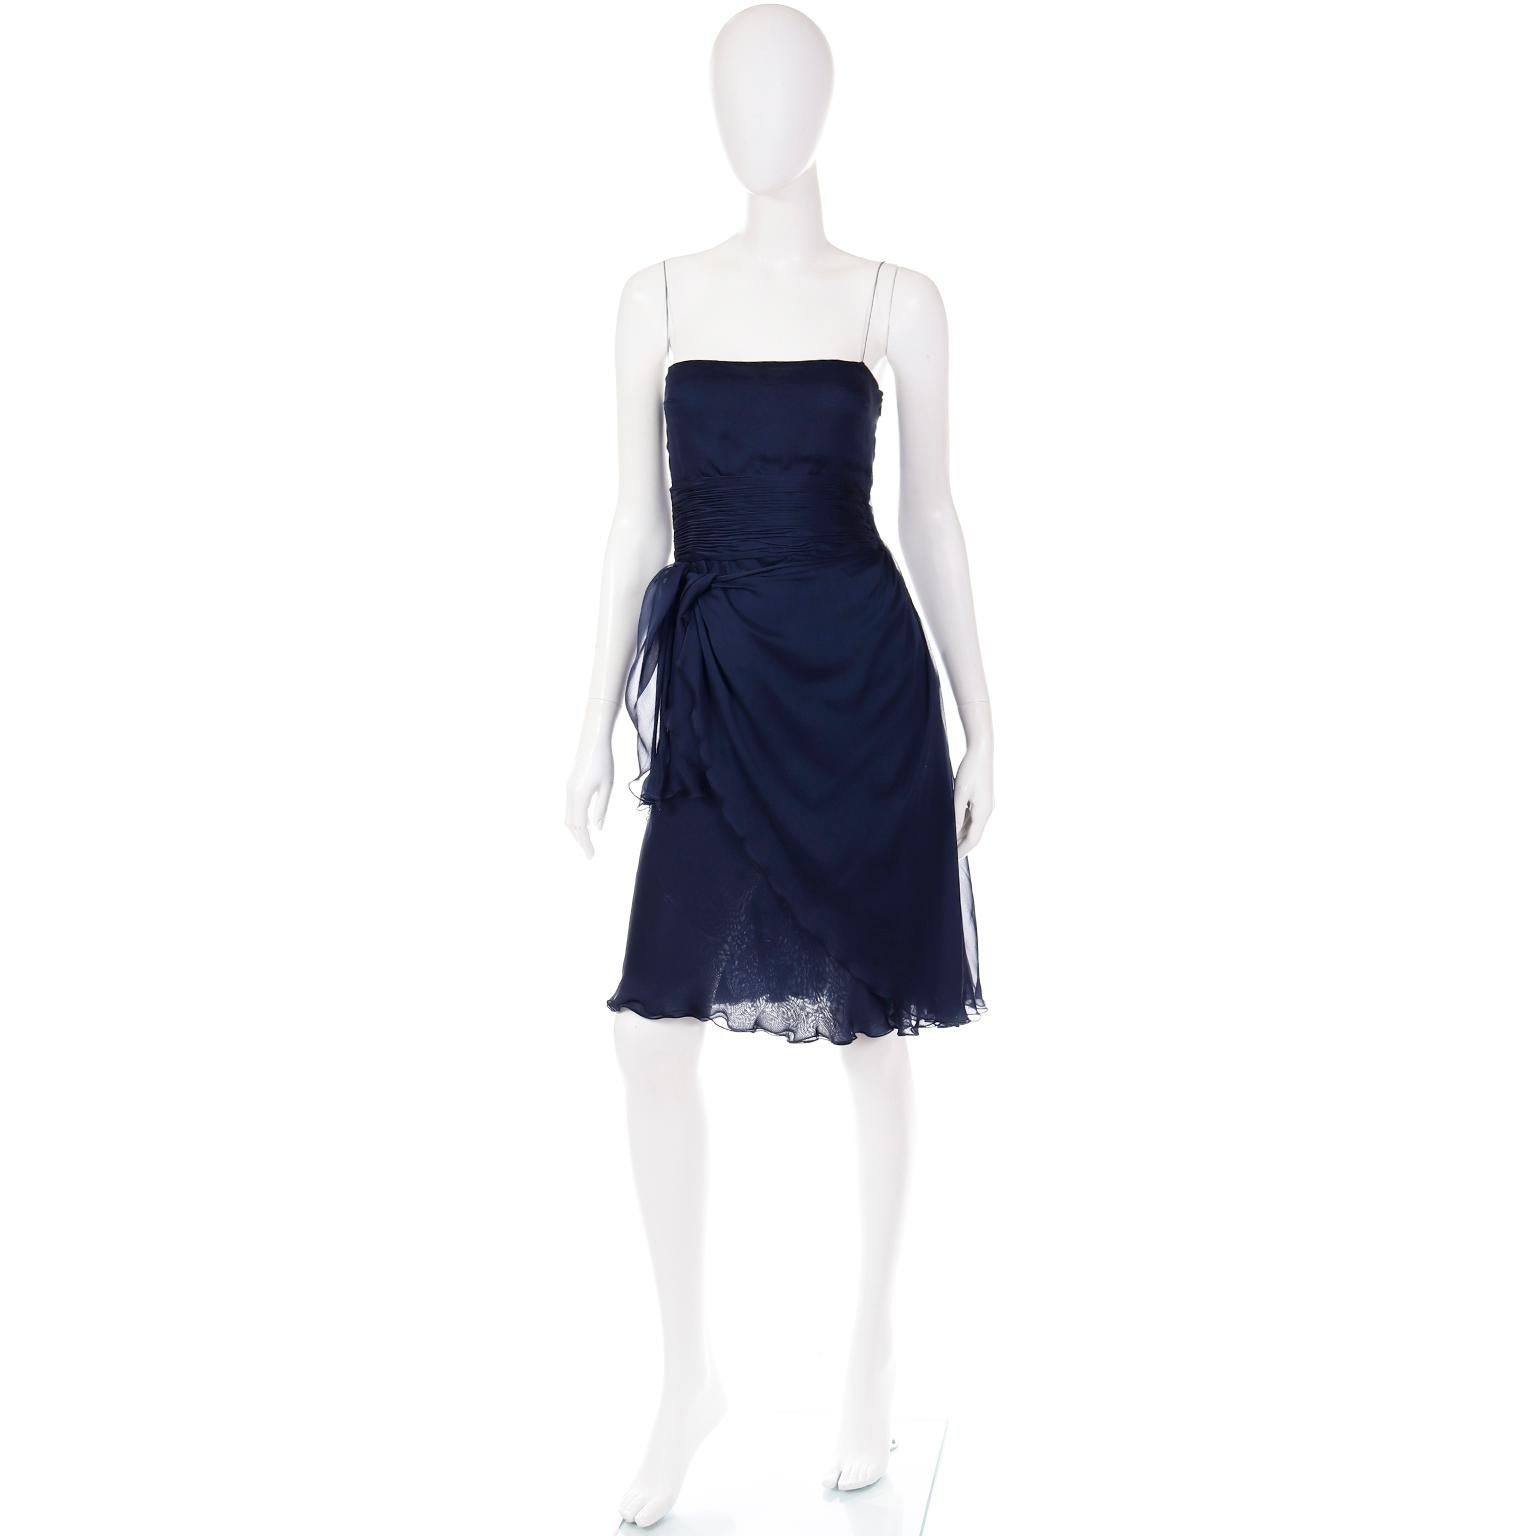 This elegant Valentino blue silk chiffon dress has such beautiful movement when worn. Designed by Valentino Garavani in the early 2000's, this is a perfect dress to add to any wardrobe. The luxe silk chiffon fabric is so fine and we love the deep,